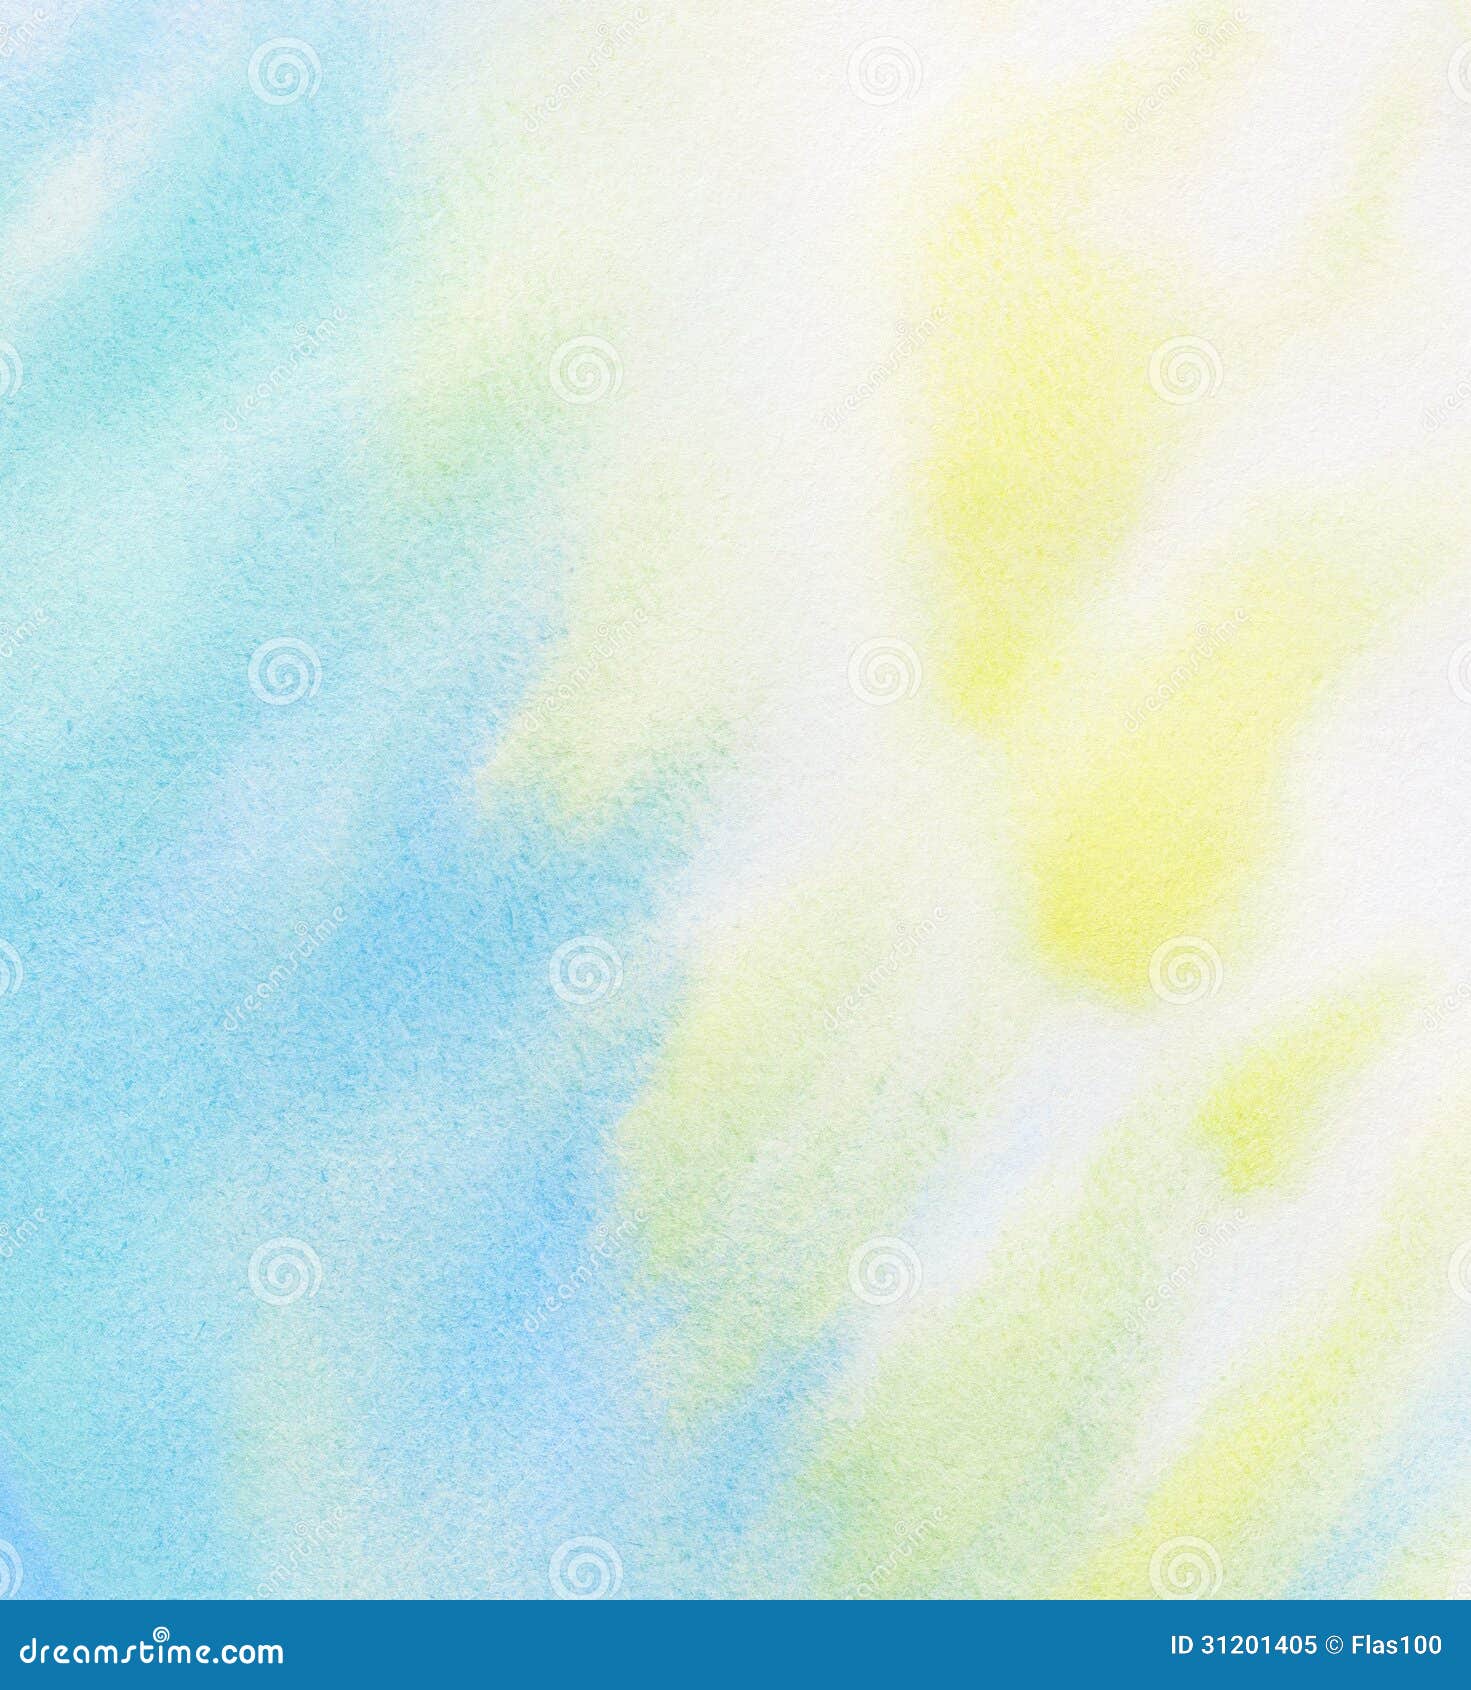 Abstract Light Color Watercolor Background Illustration 31201405 - Megapixl